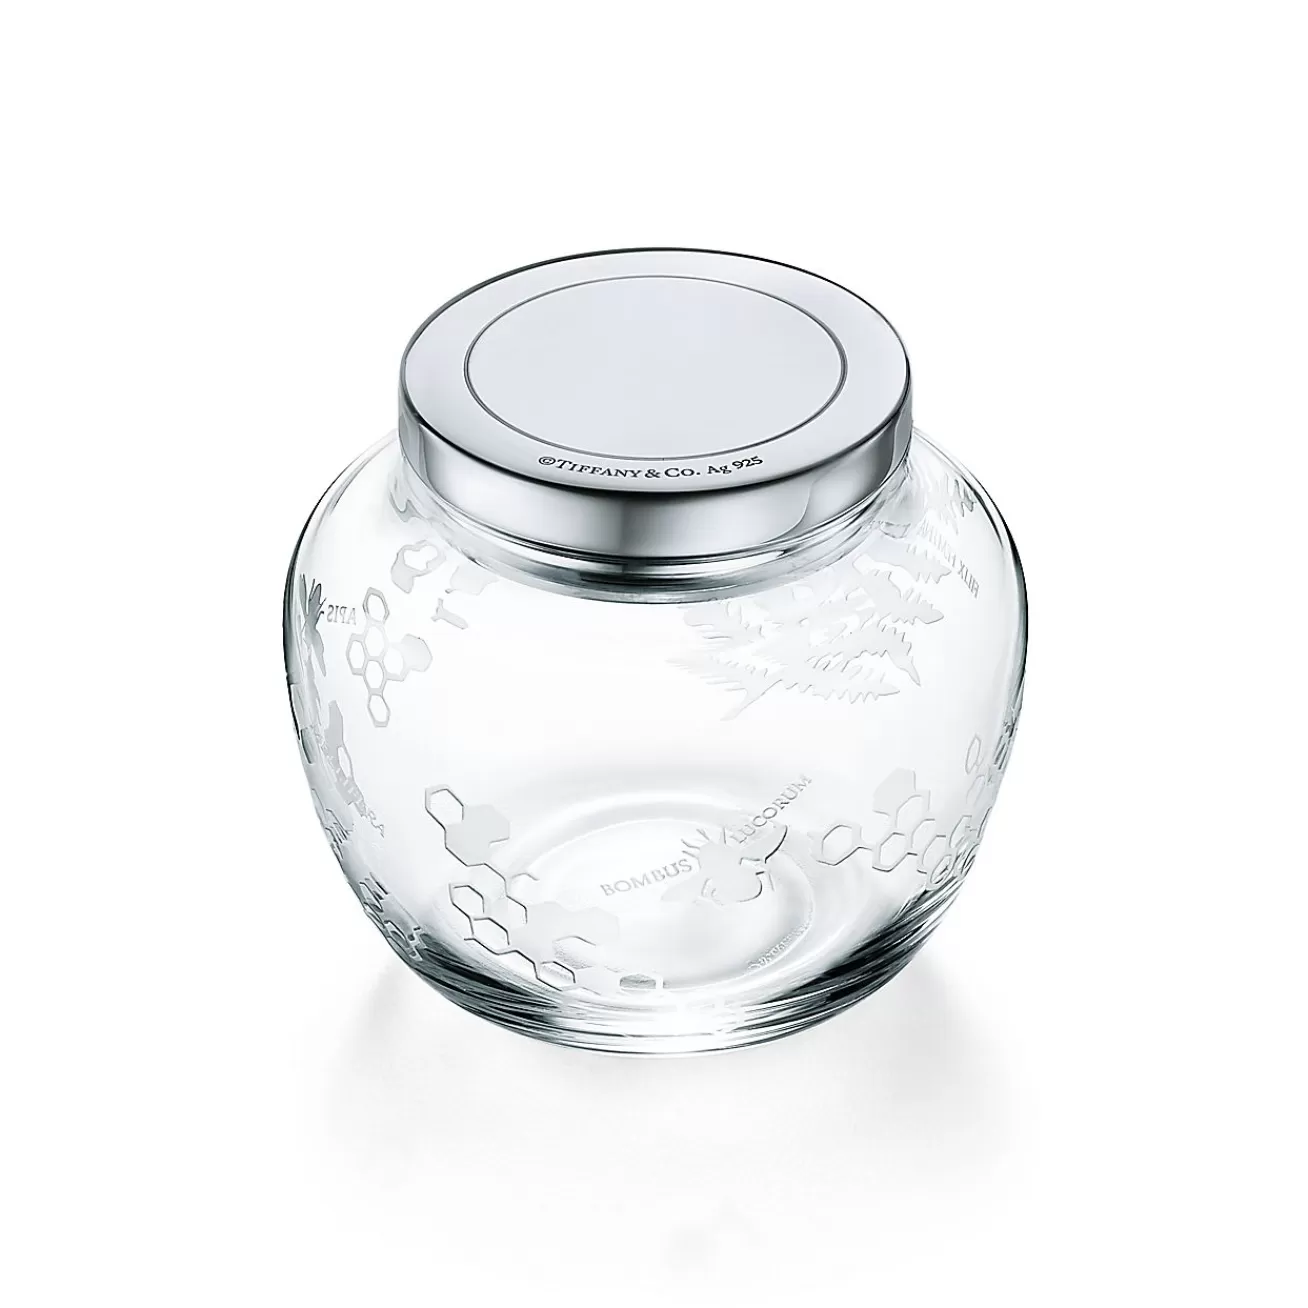 Tiffany & Co. Flora & Fauna lidded pot in mouth-blown crystal glass with sterling silver. | ^ The Home | Housewarming Gifts